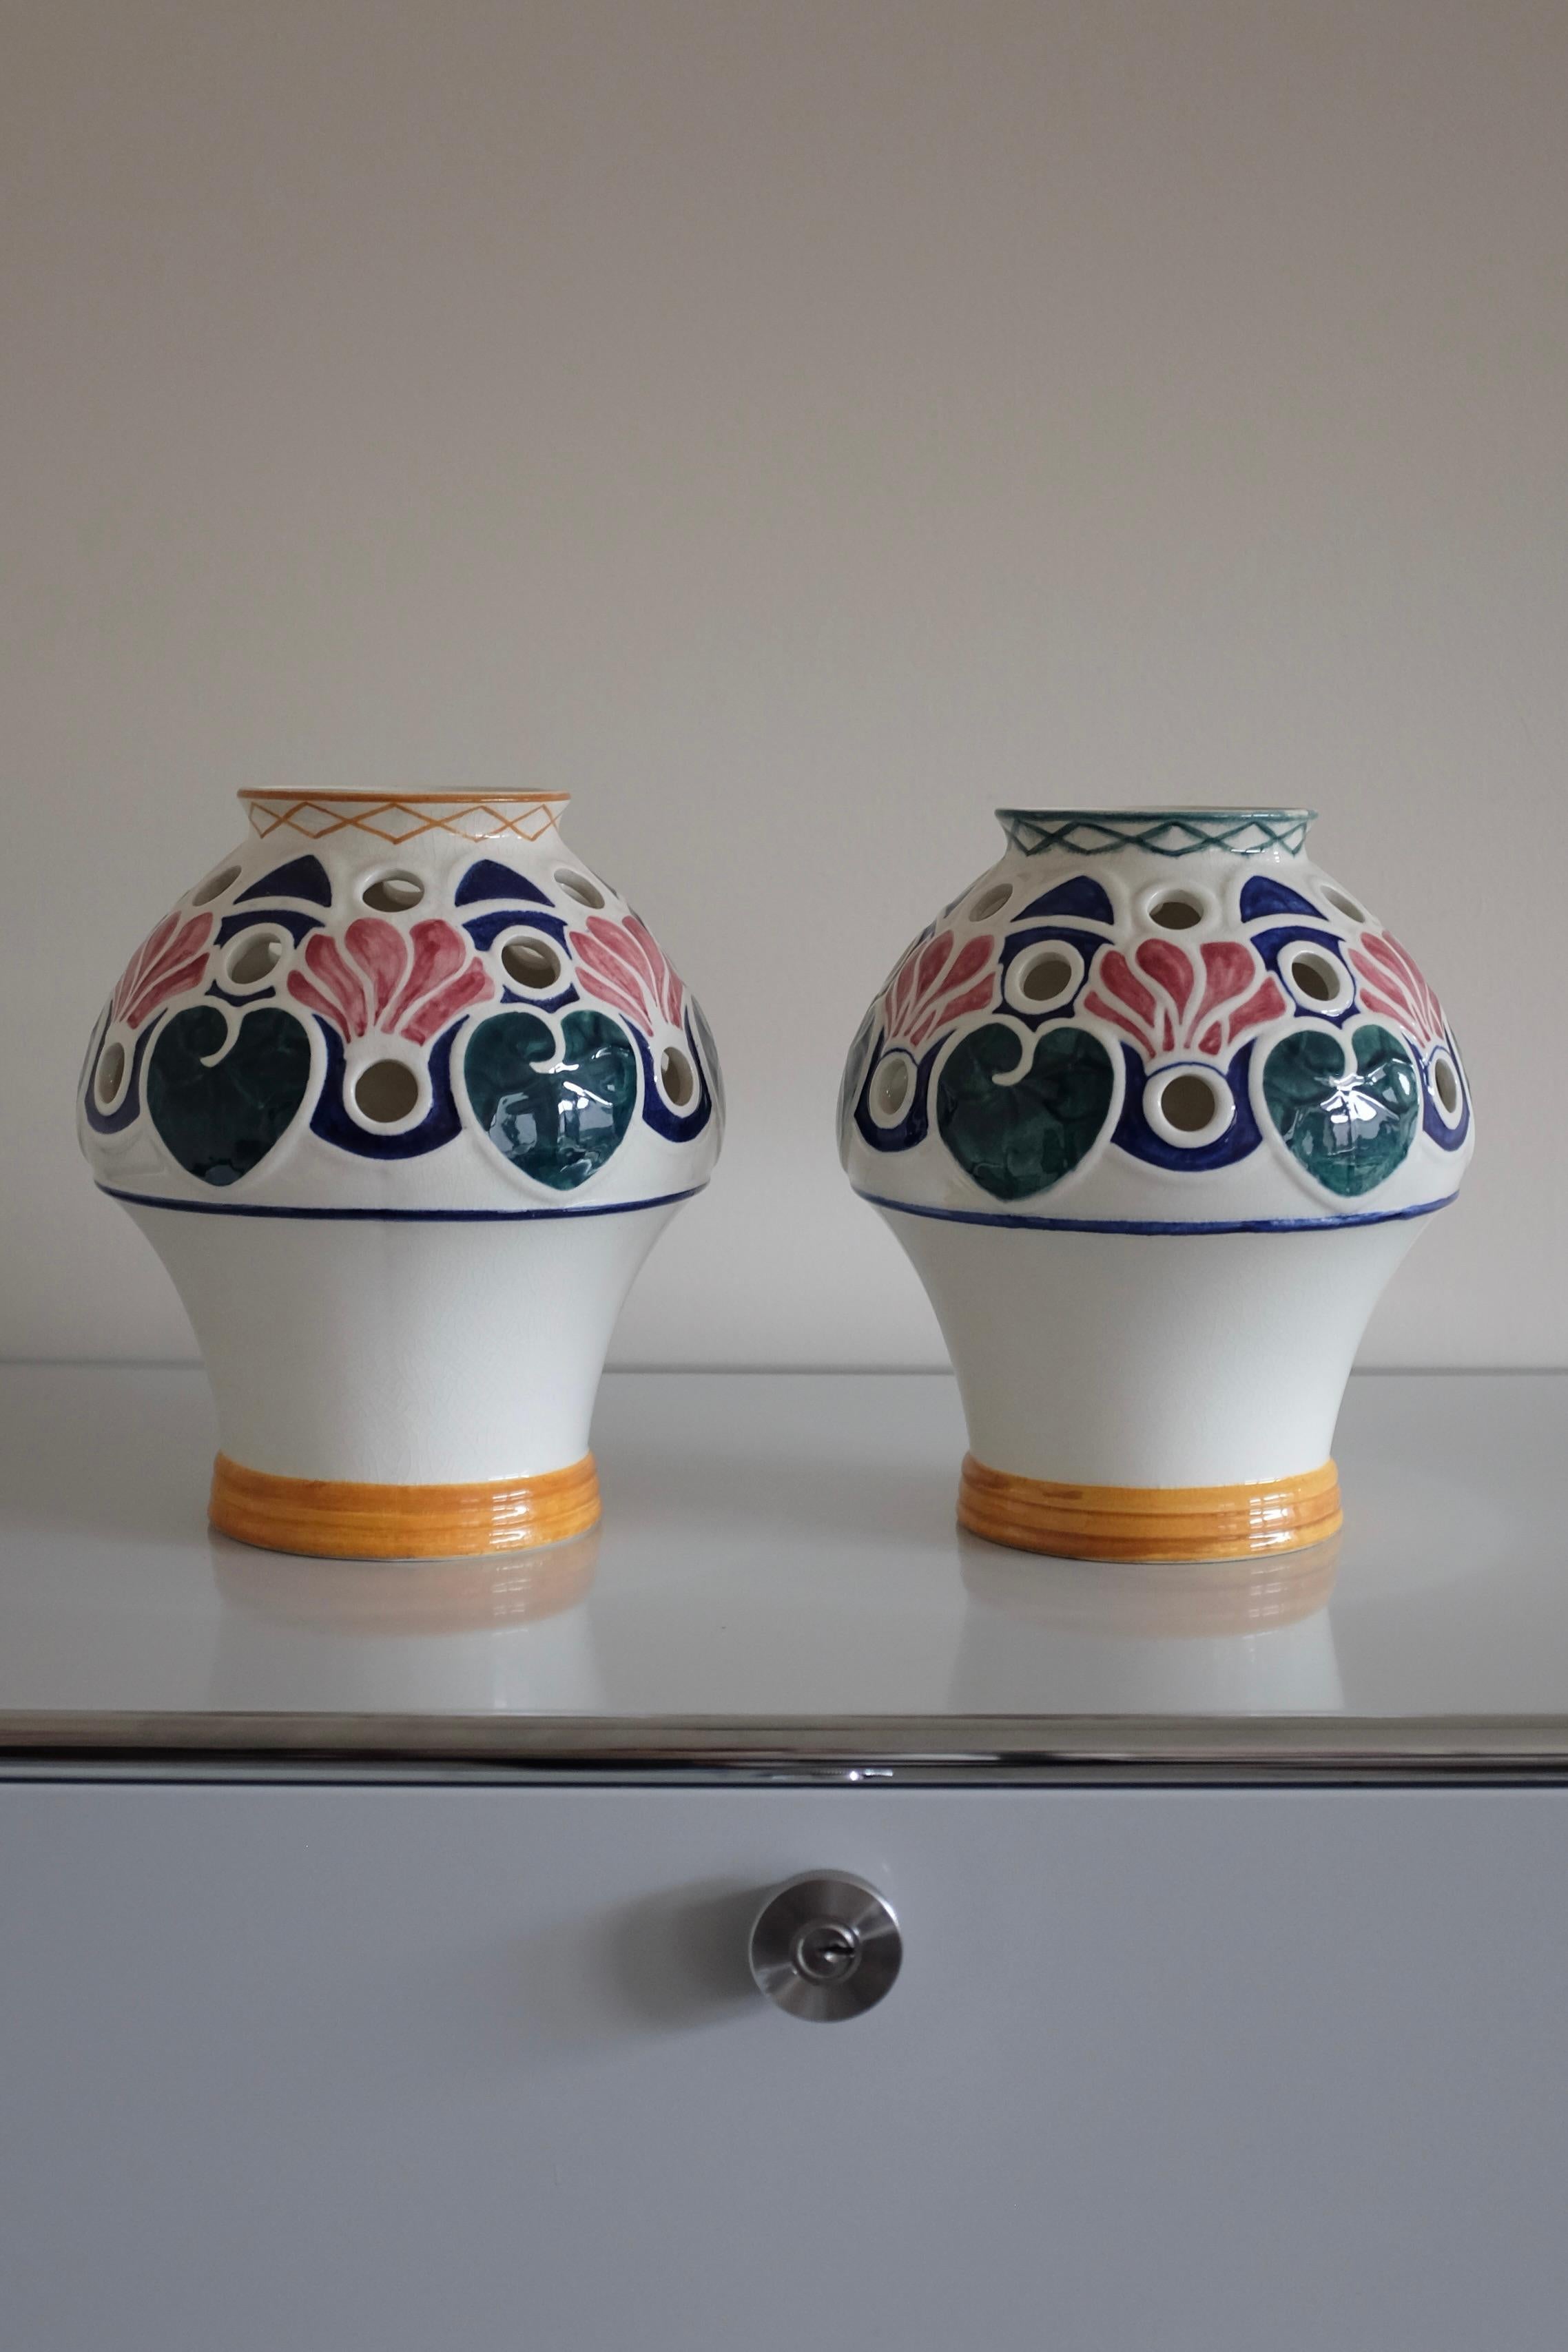 Stunning and rare set of early 20th Century Vases by the Swedish designer Alf Wallander for Rörstrand. As with many of Alf Wallanders ceramic pieces these vases have a art nouveau inspired flower design in green, blue, pinks and yellow colors. Small